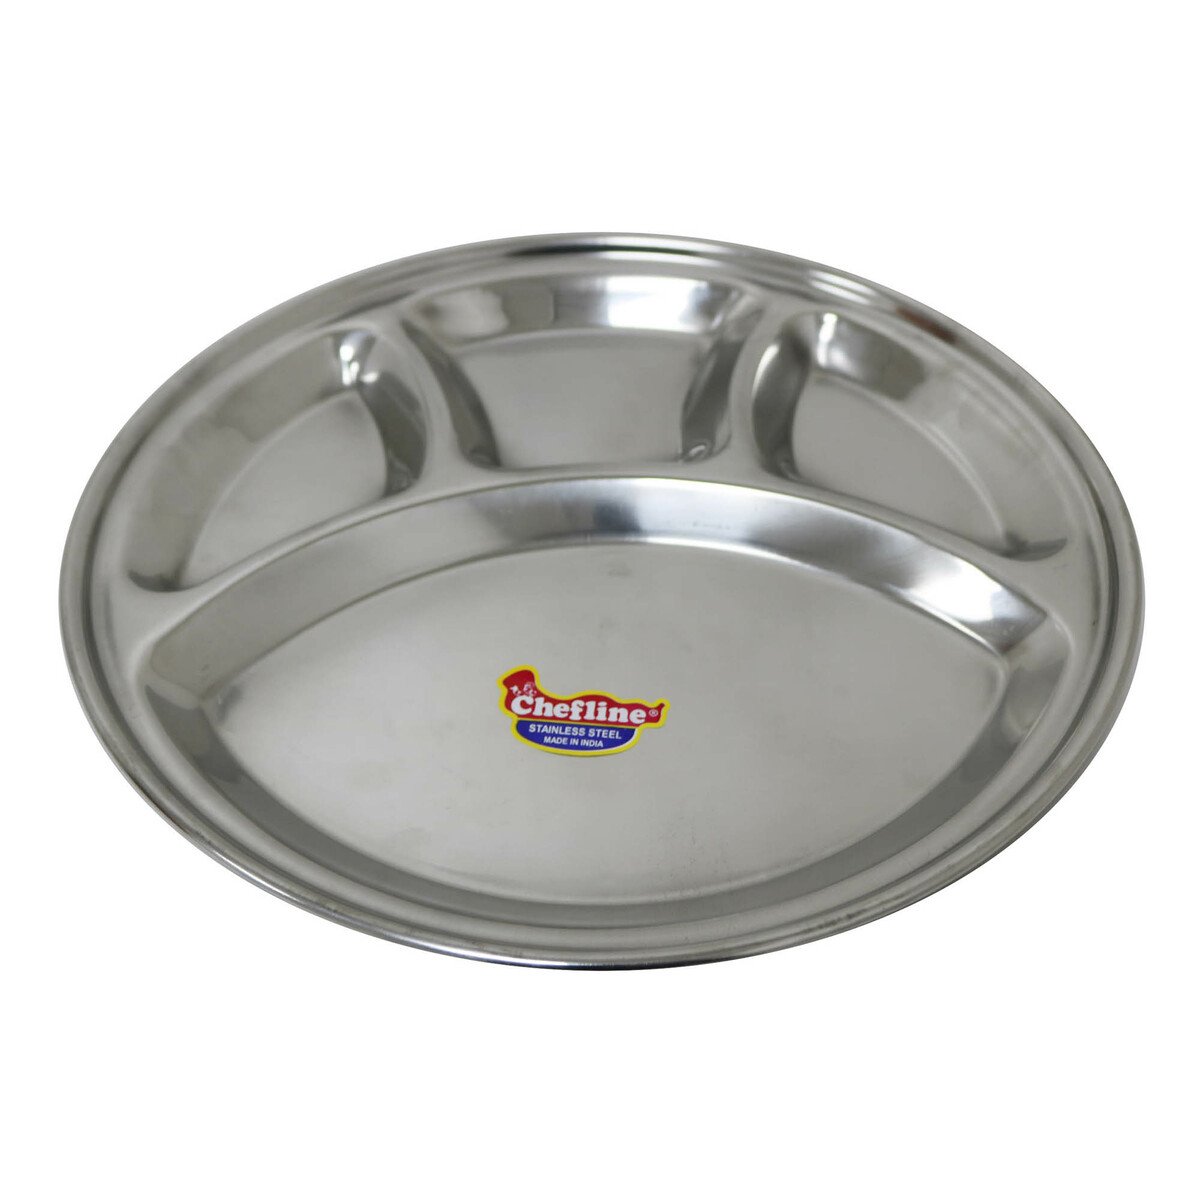 Chefline Stainless Steel Mess Thali No.14 Ind